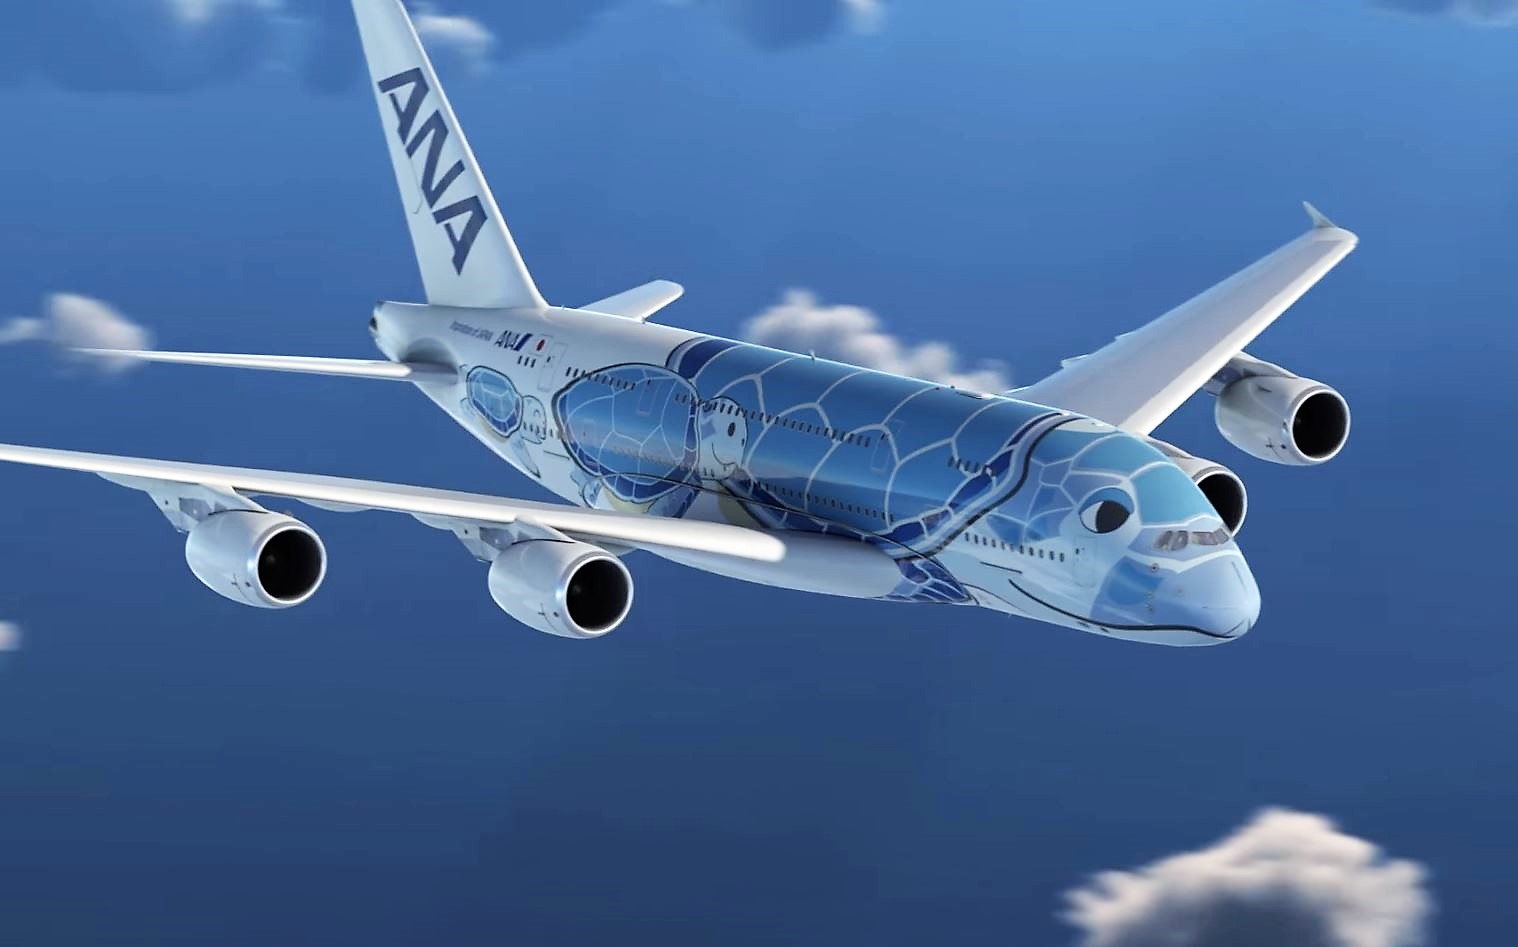 ANA A380 livery symbolising good luck and prosperity in Hawaii